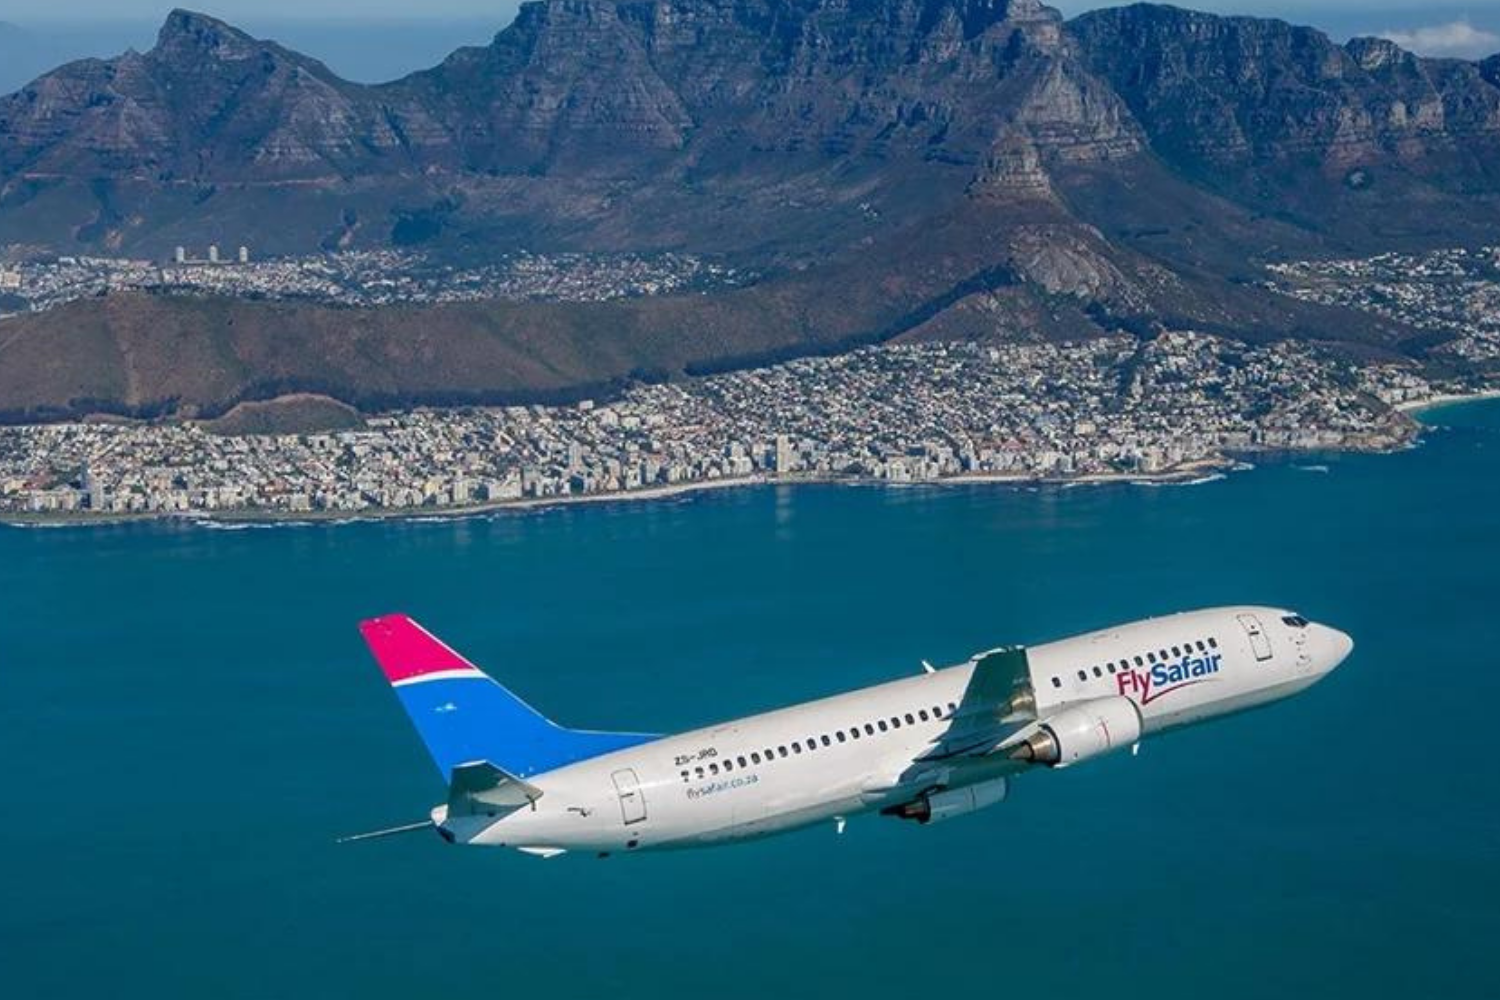 FlySafair grounds one of its planes after technical glitch - Travel News, Insights & Resources.